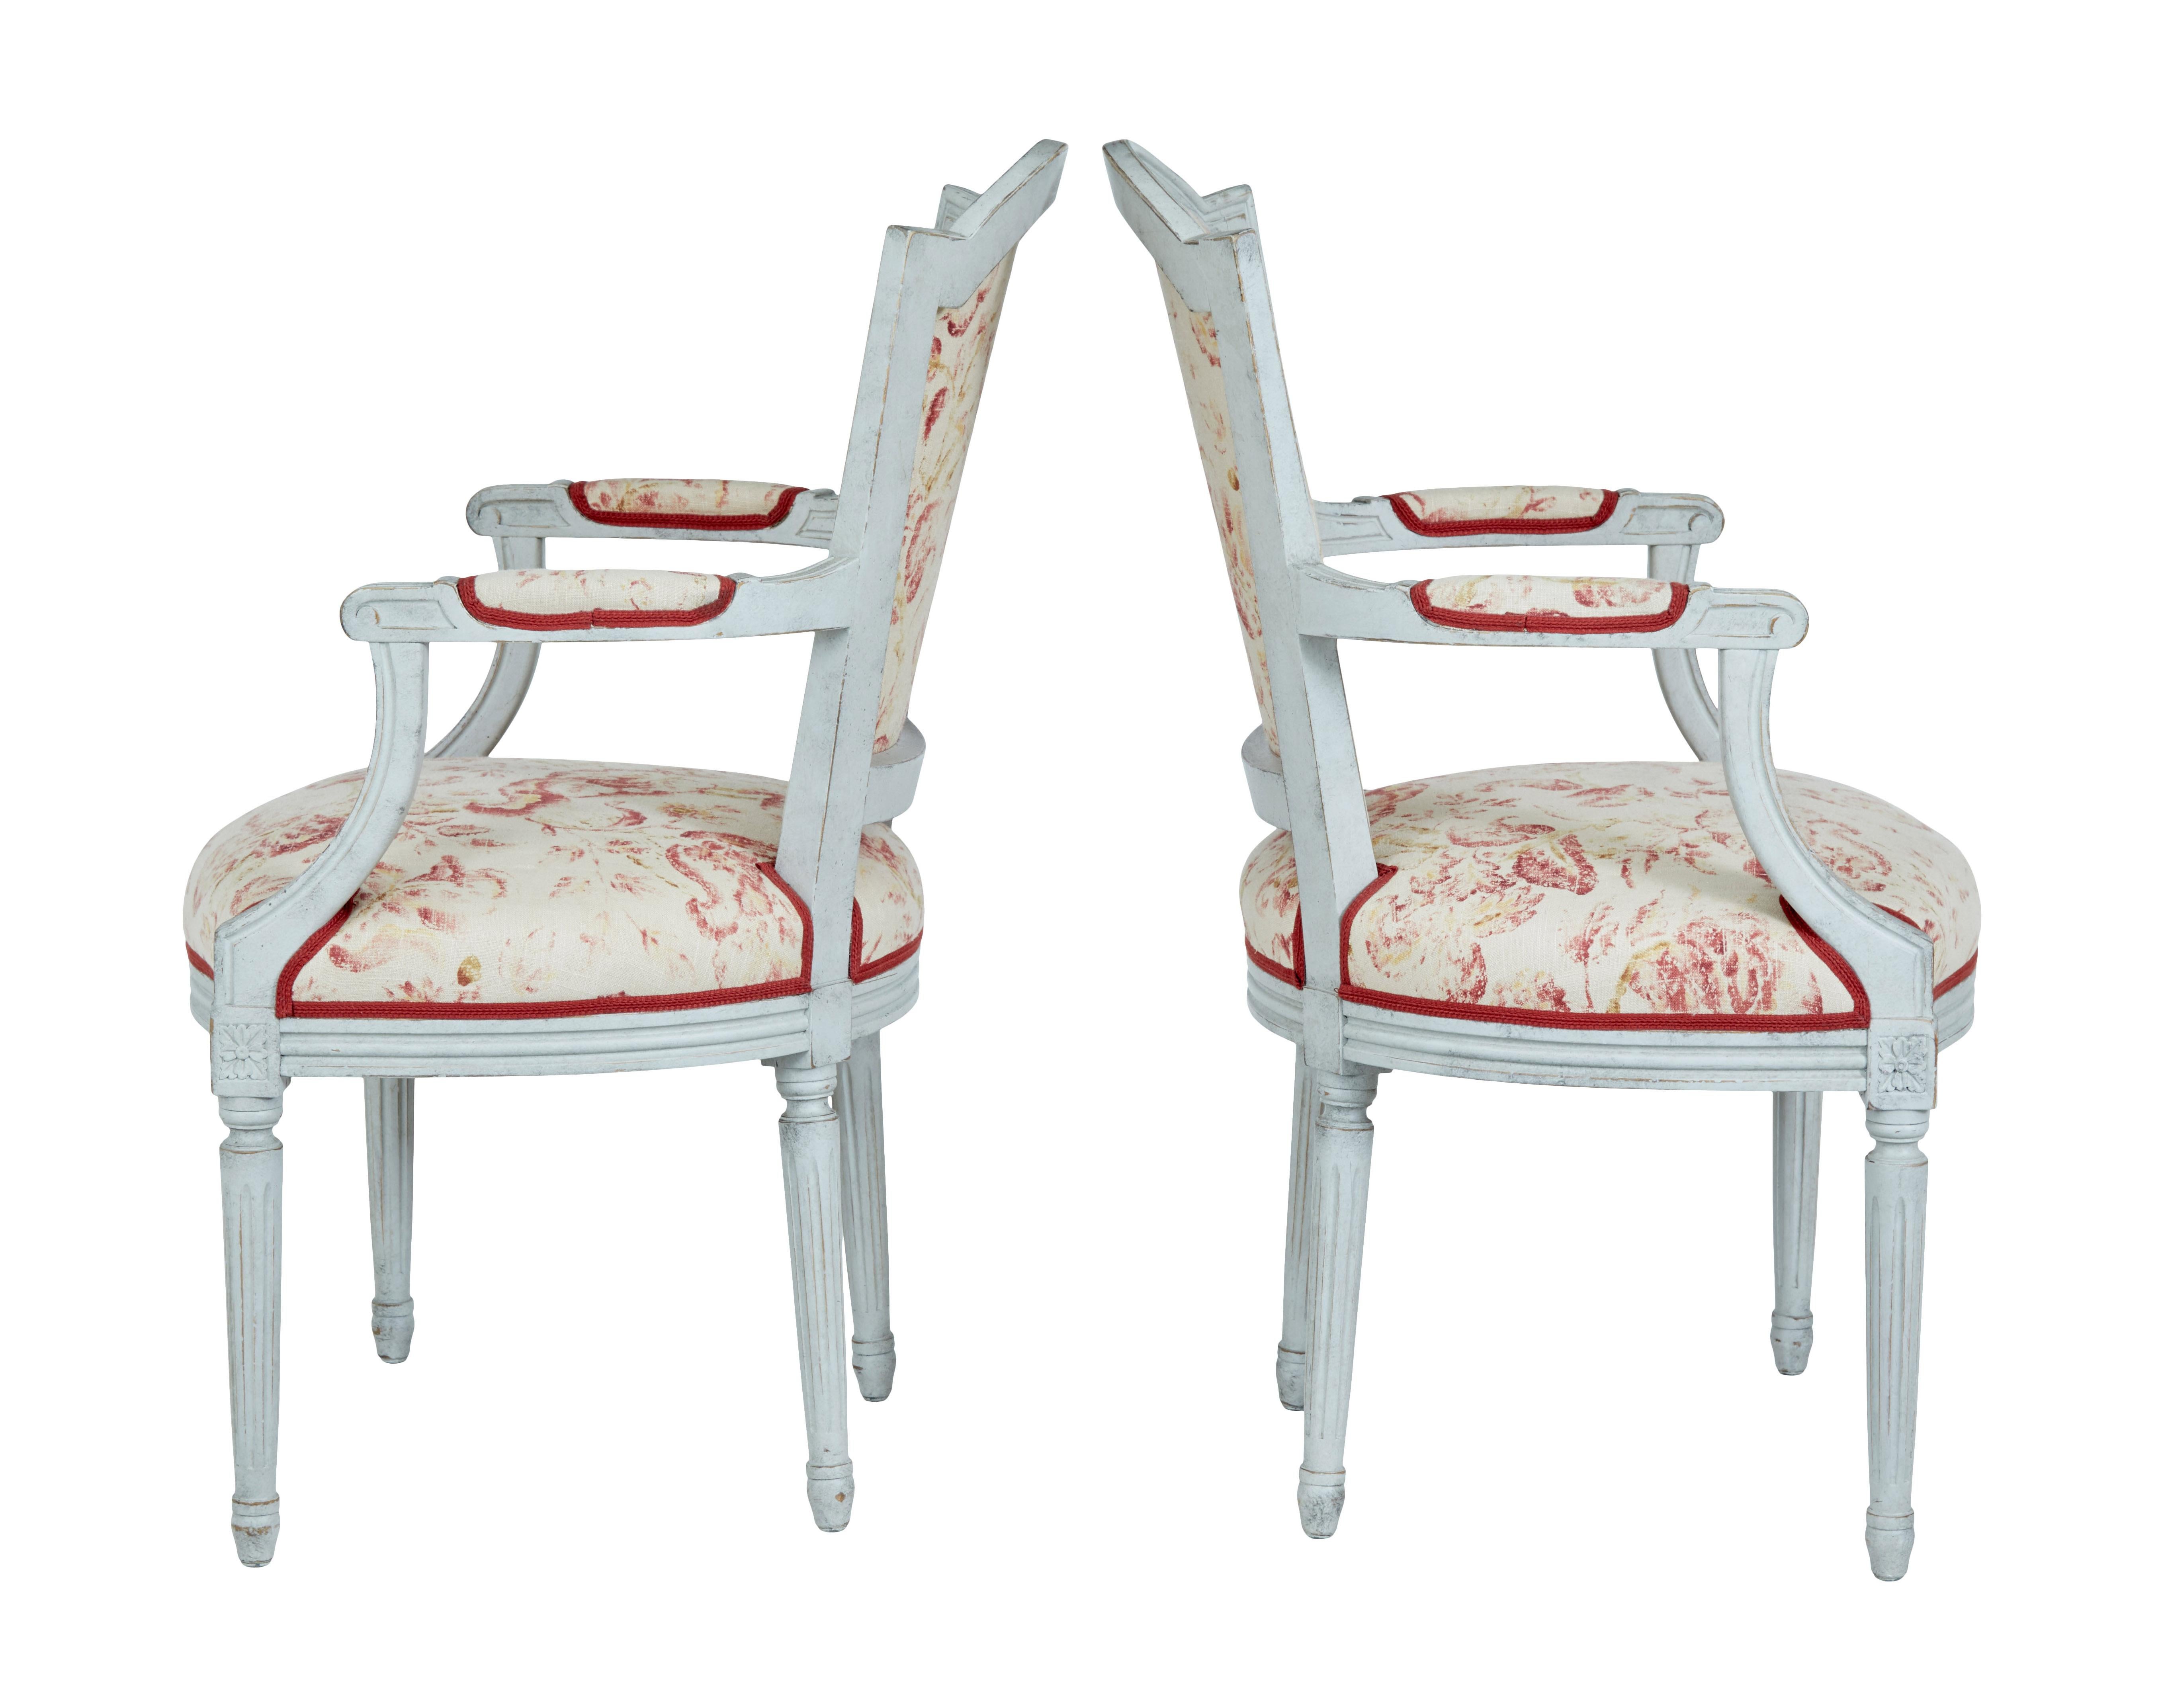 Pair of painted 19th century Swedish shield back armchairs circa 1870.

Good quality pair of Scandinavian armchairs. Shield back shaped back rest, carved arms with acanthus leaf detail. Standing on 4 fluted legs.

Later light grey paint which